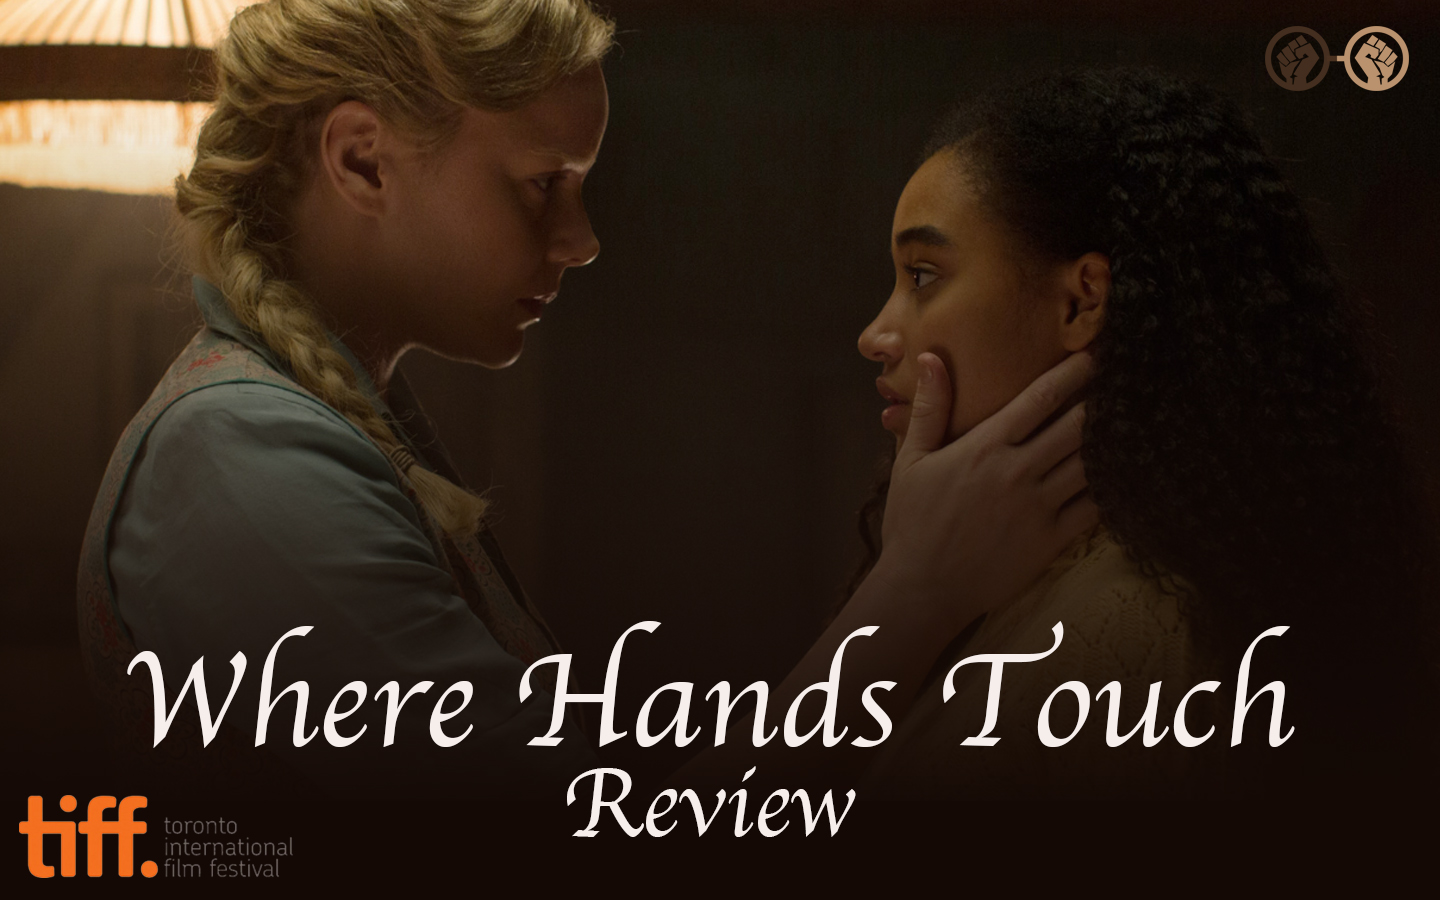 TIFF 18: ‘Where Hands Touch’ is an Emotional & Touching Story Through the Eyes of a Biracial German Girl – Review